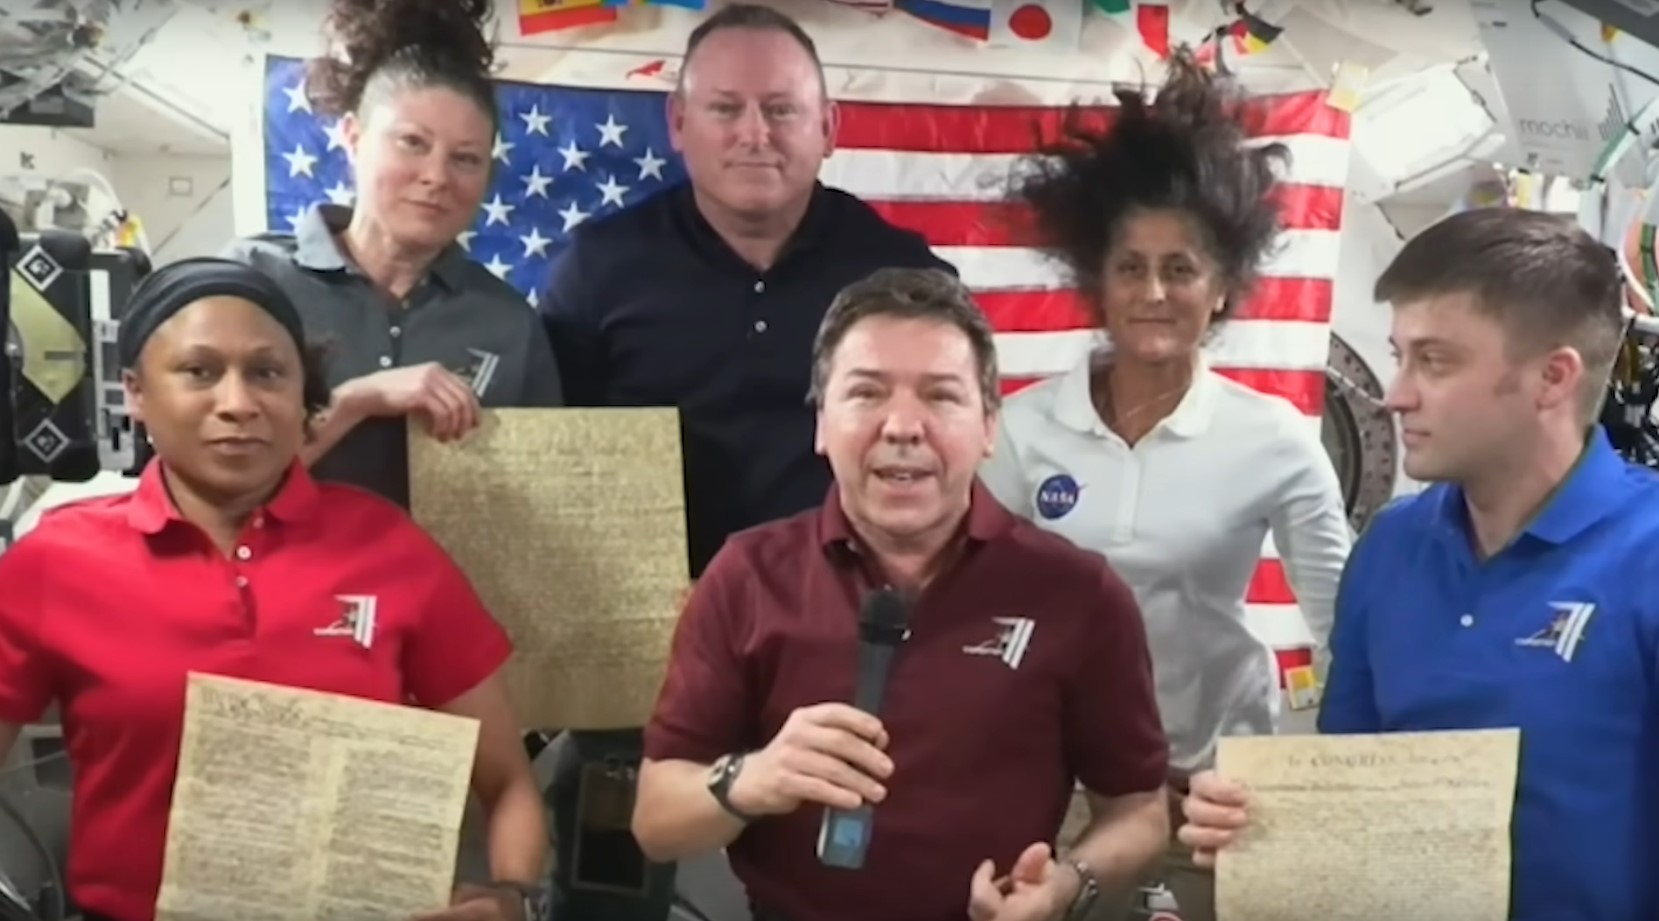 NASA astronauts aboard the ISS send a Fourth of July message.